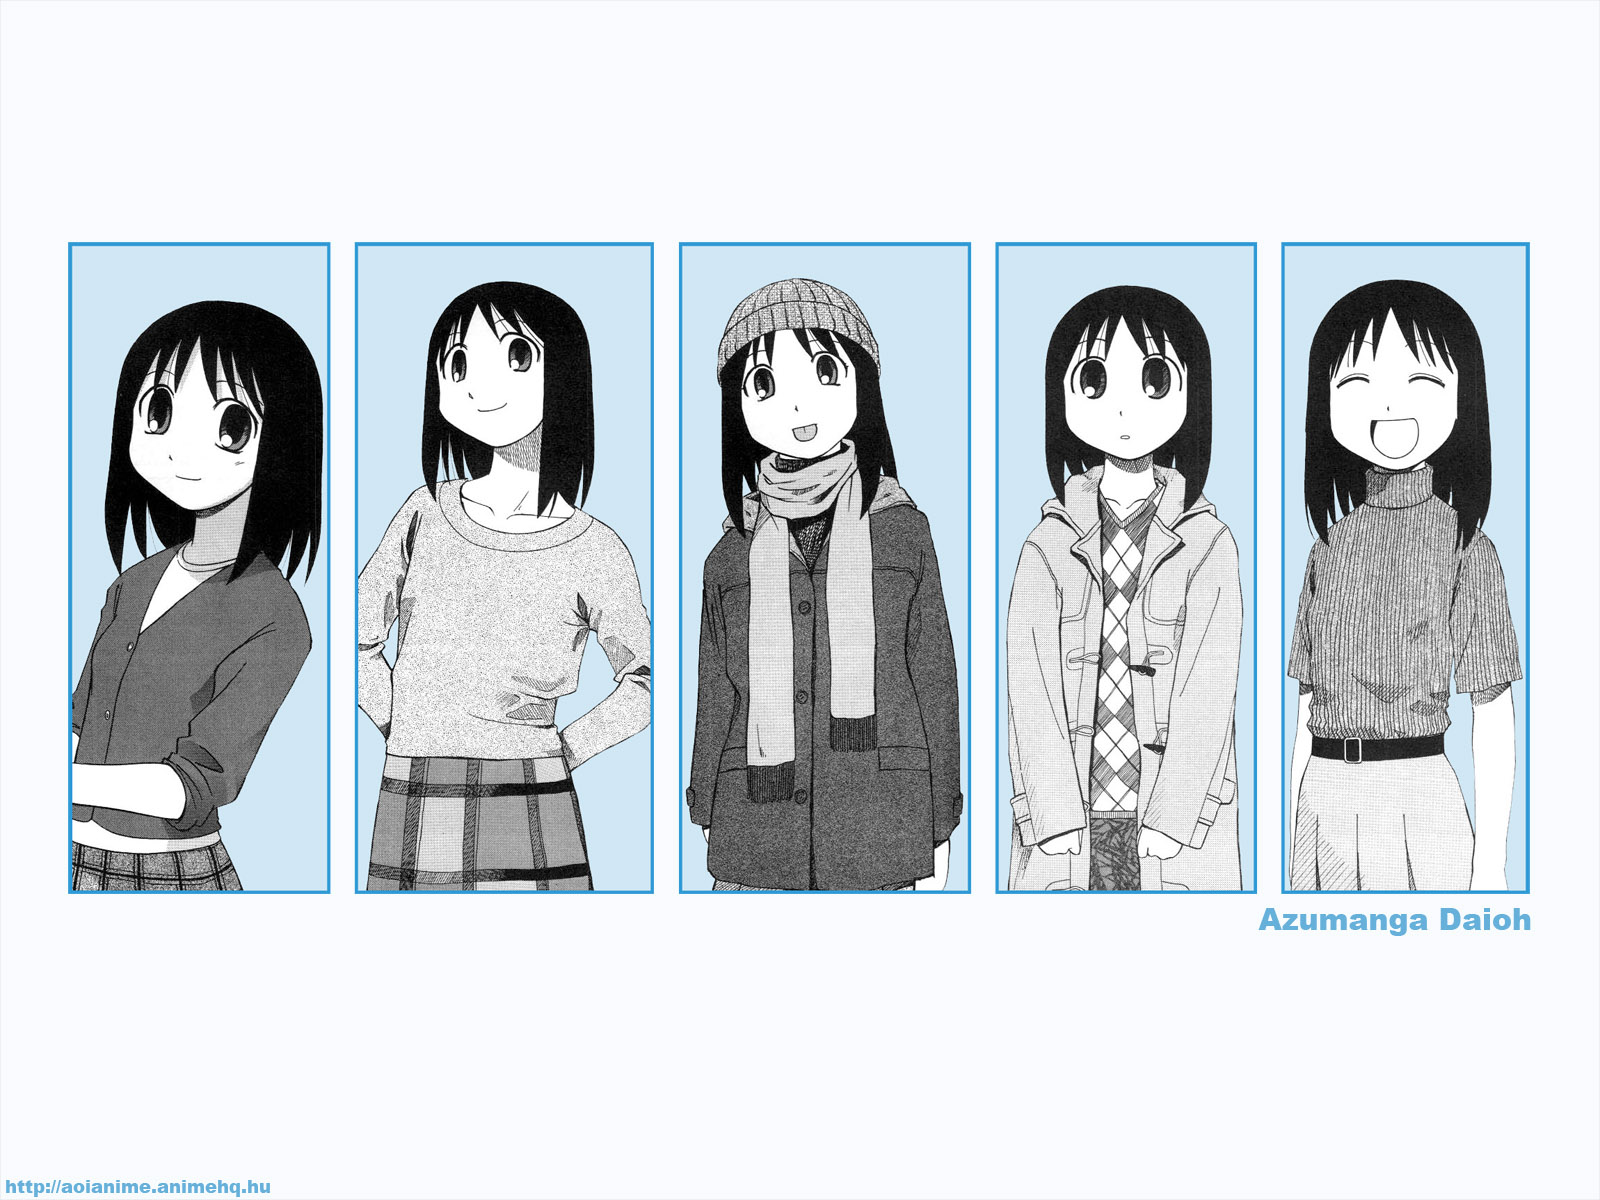 Azumanga Daioh anime characters with vibrant colors on a peaceful background.